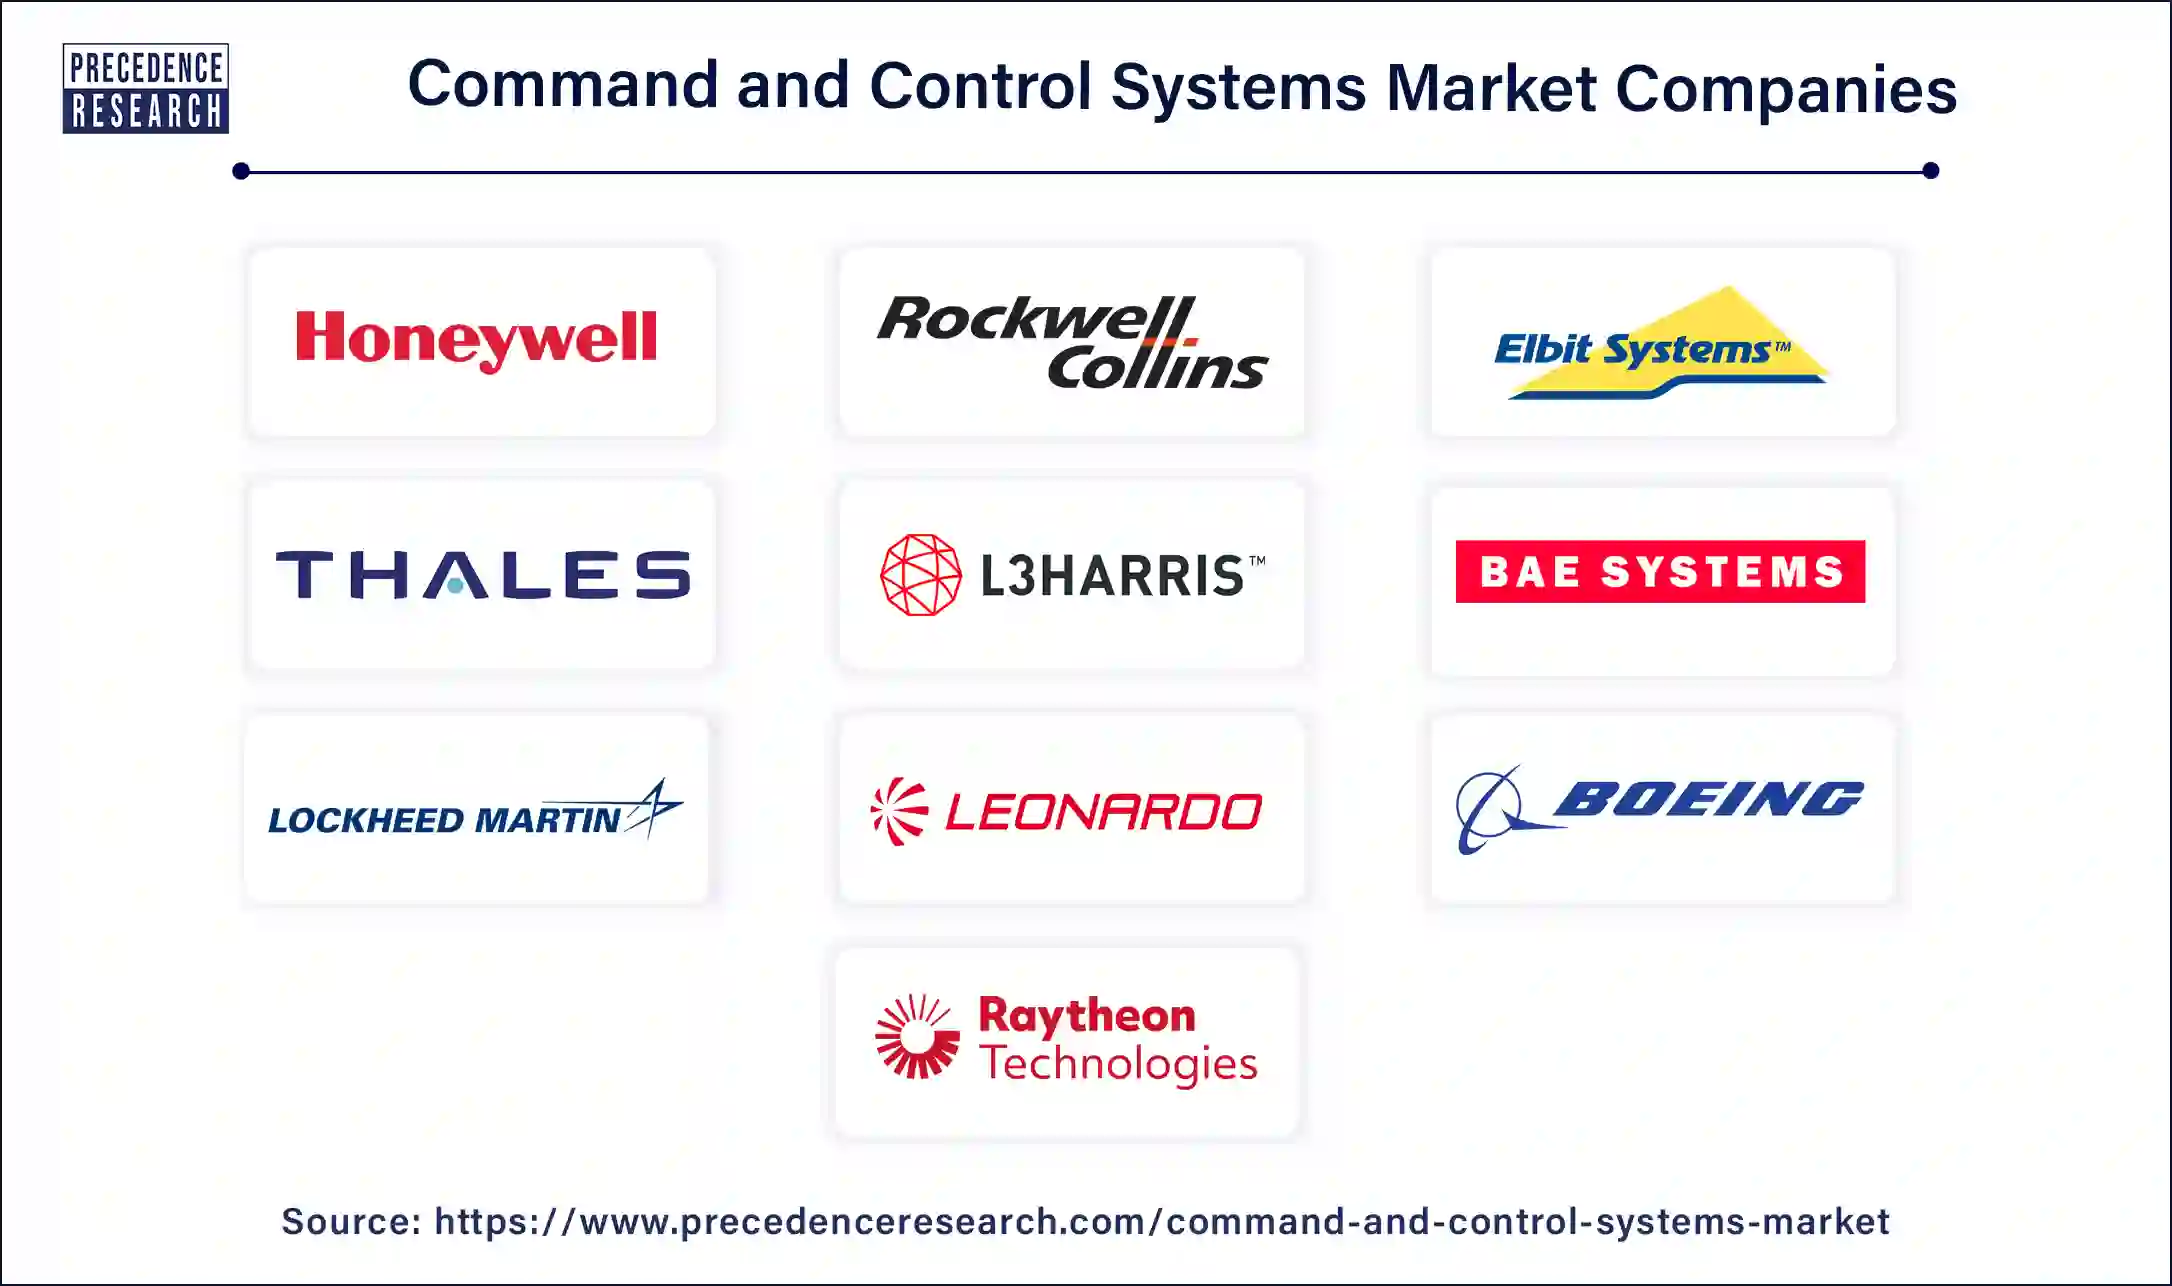 Command and Control Systems Companies